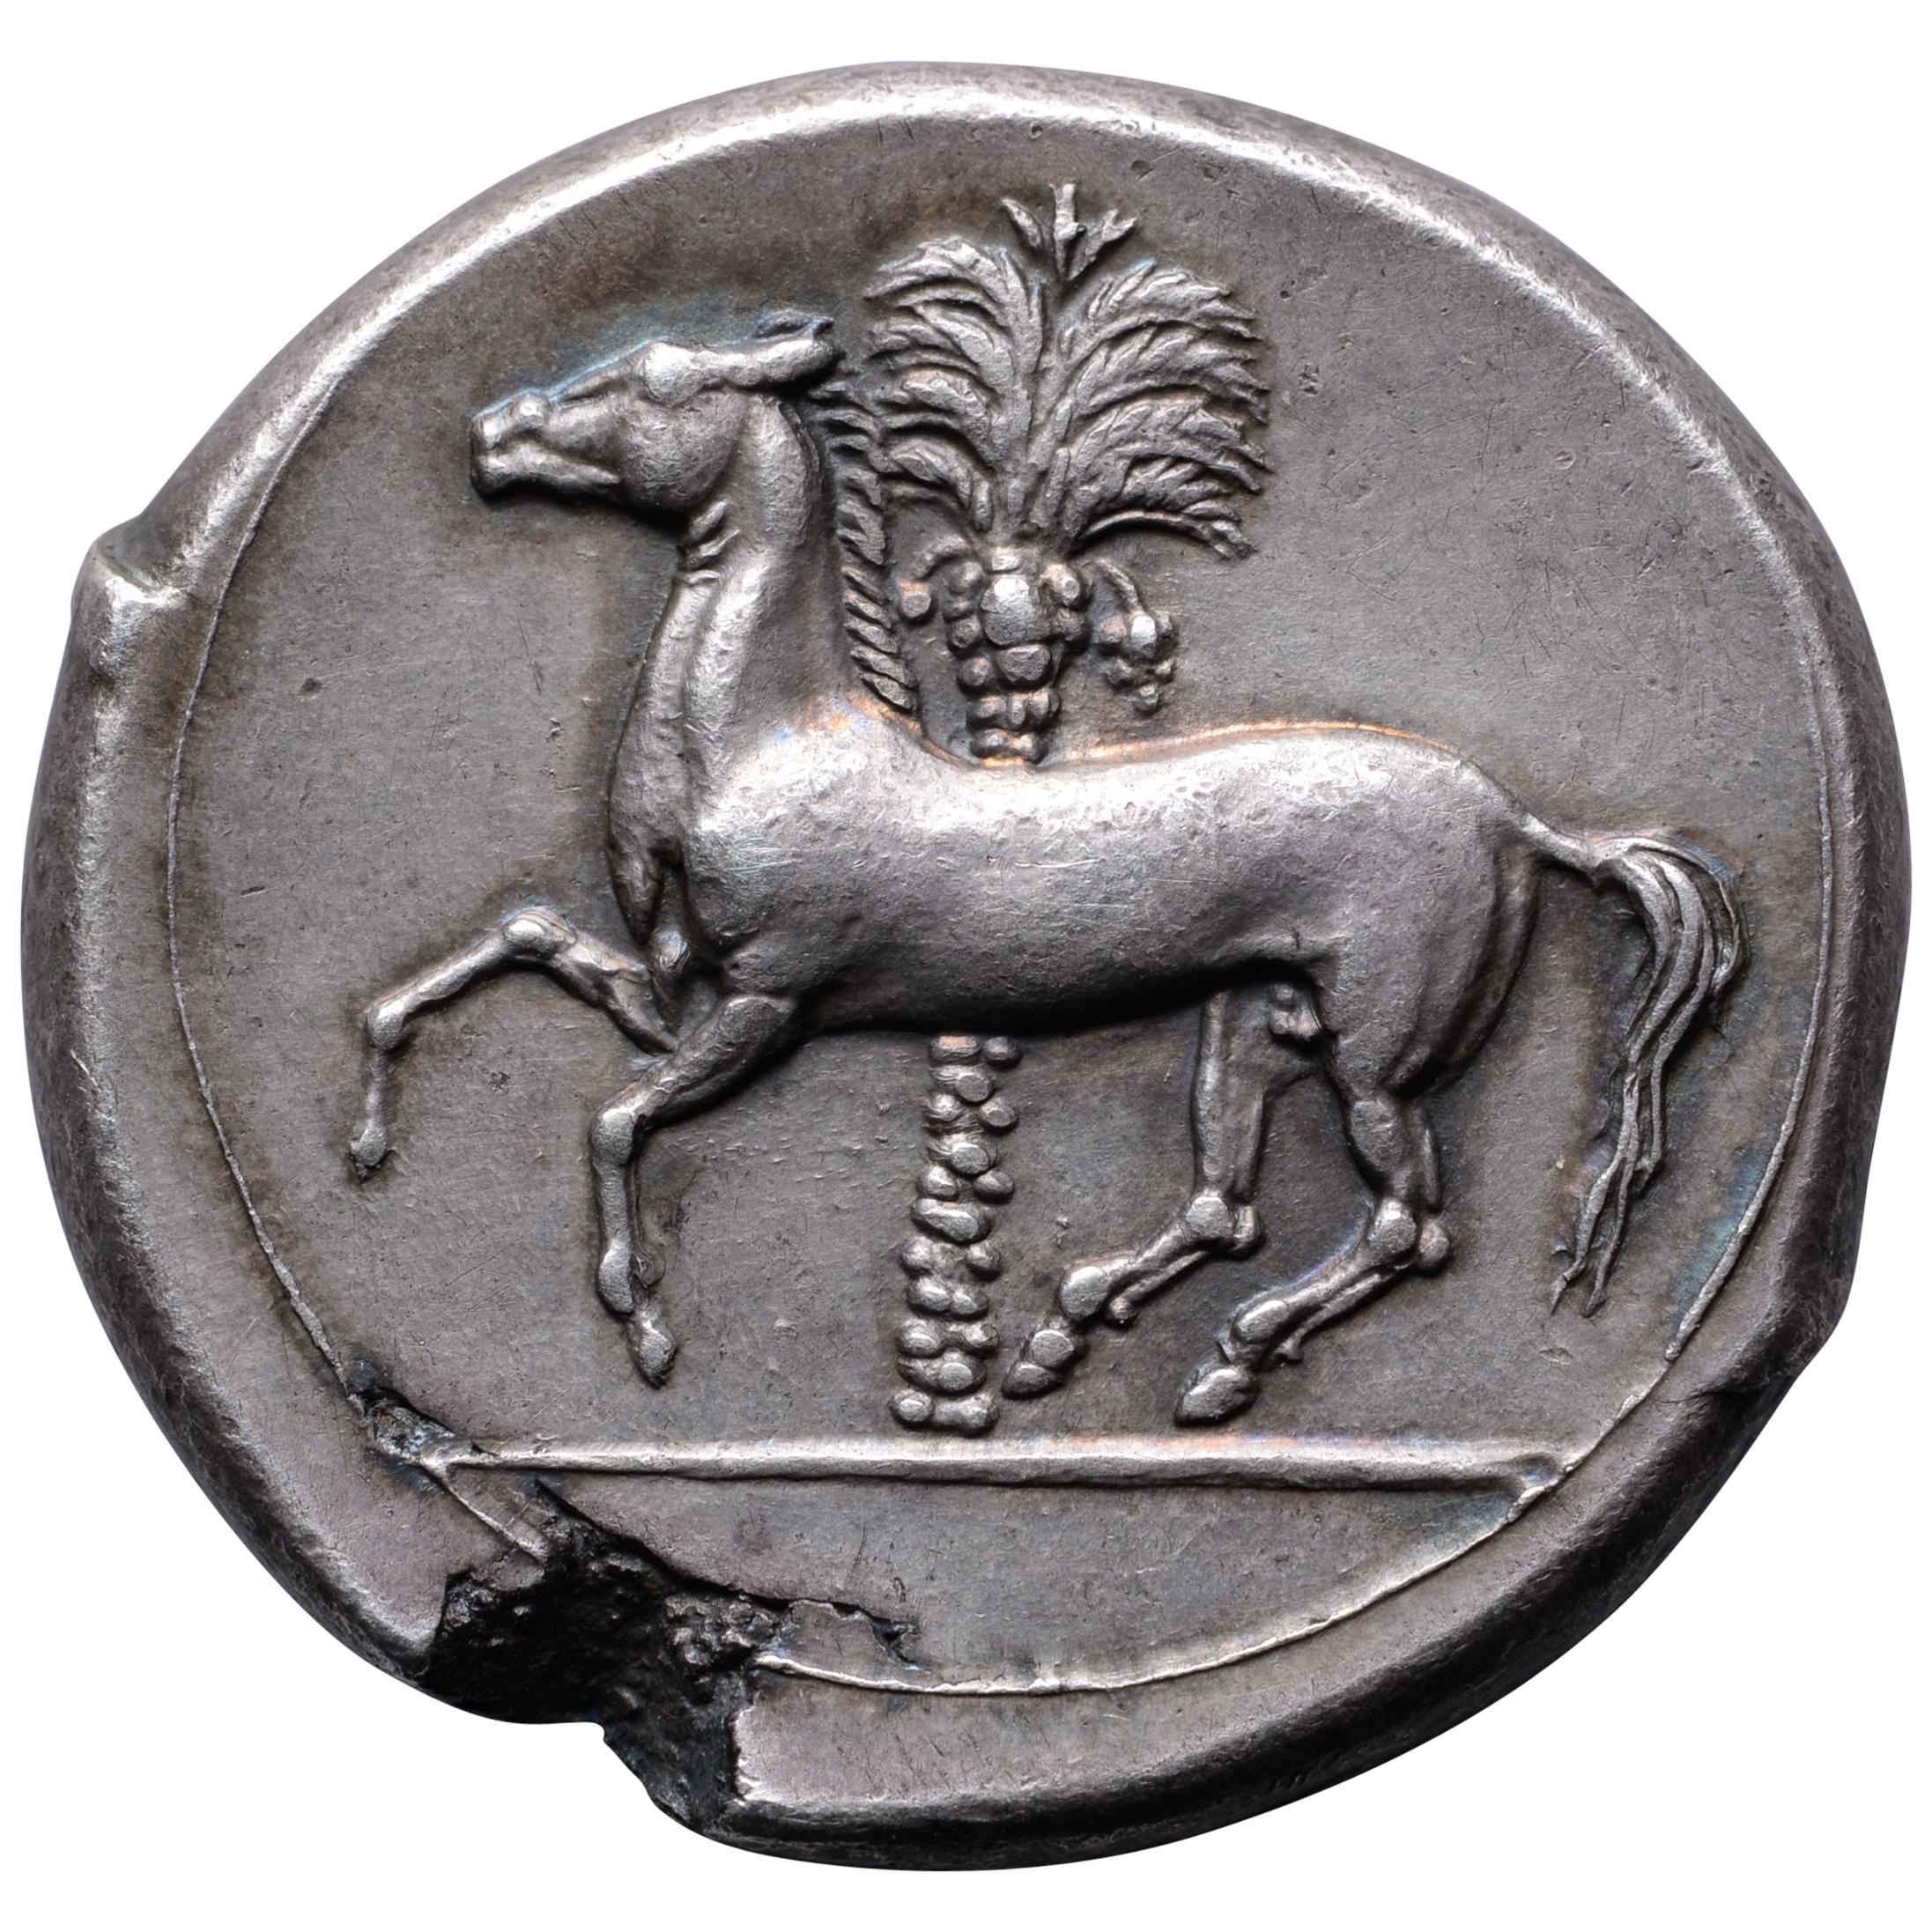 Superb Ancient Greek Silver Punic Coin from Sicily